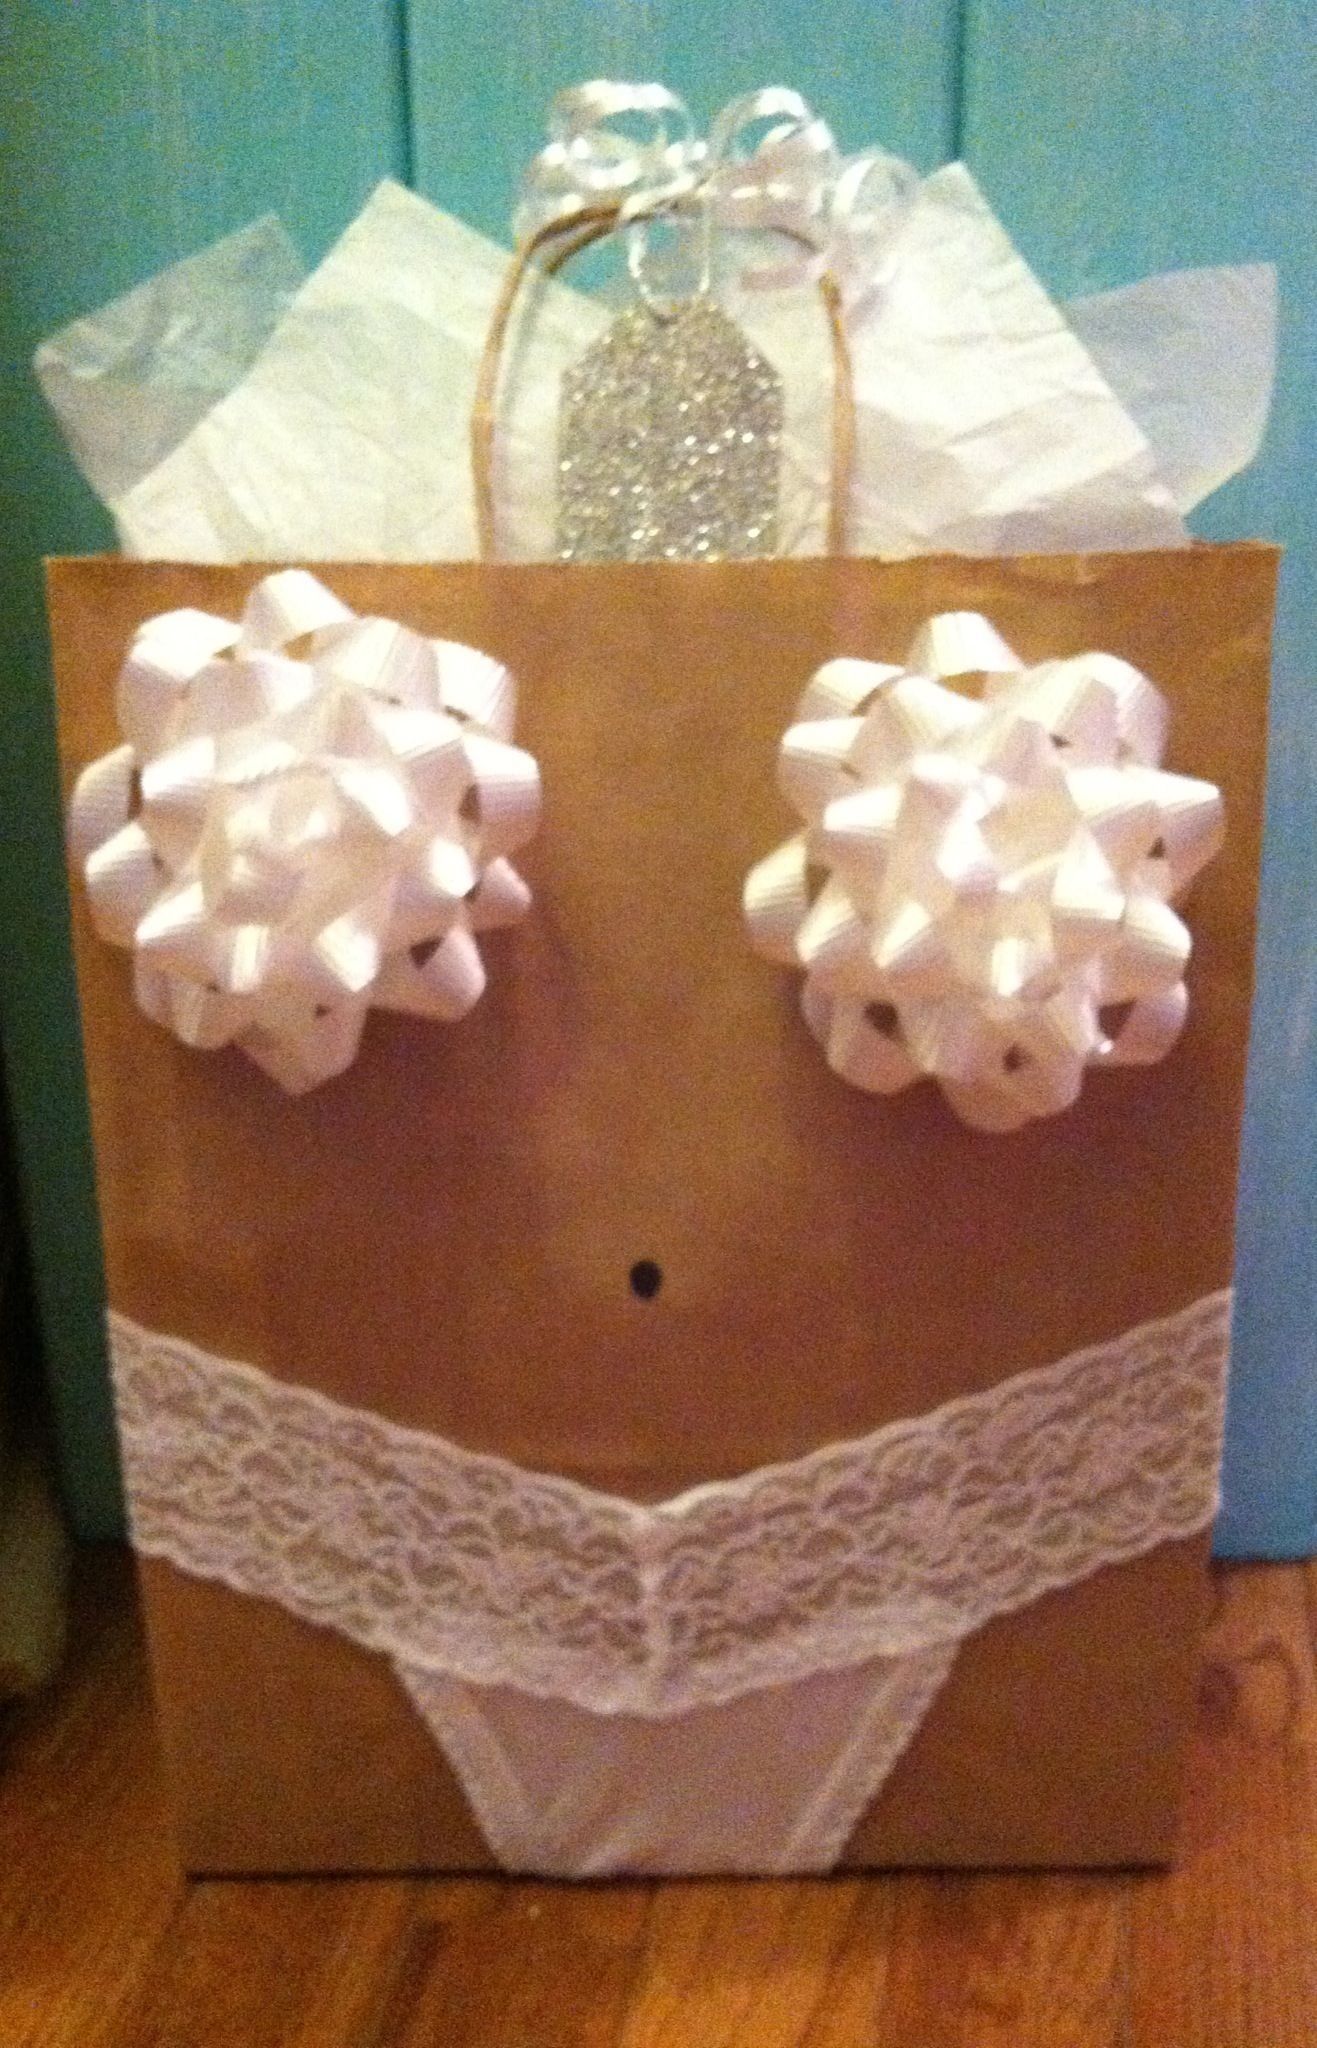 10 Great Bridal Shower Gifts Ideas For The Bride lingerie shower gift wrap idea next person to get married is 12 2022